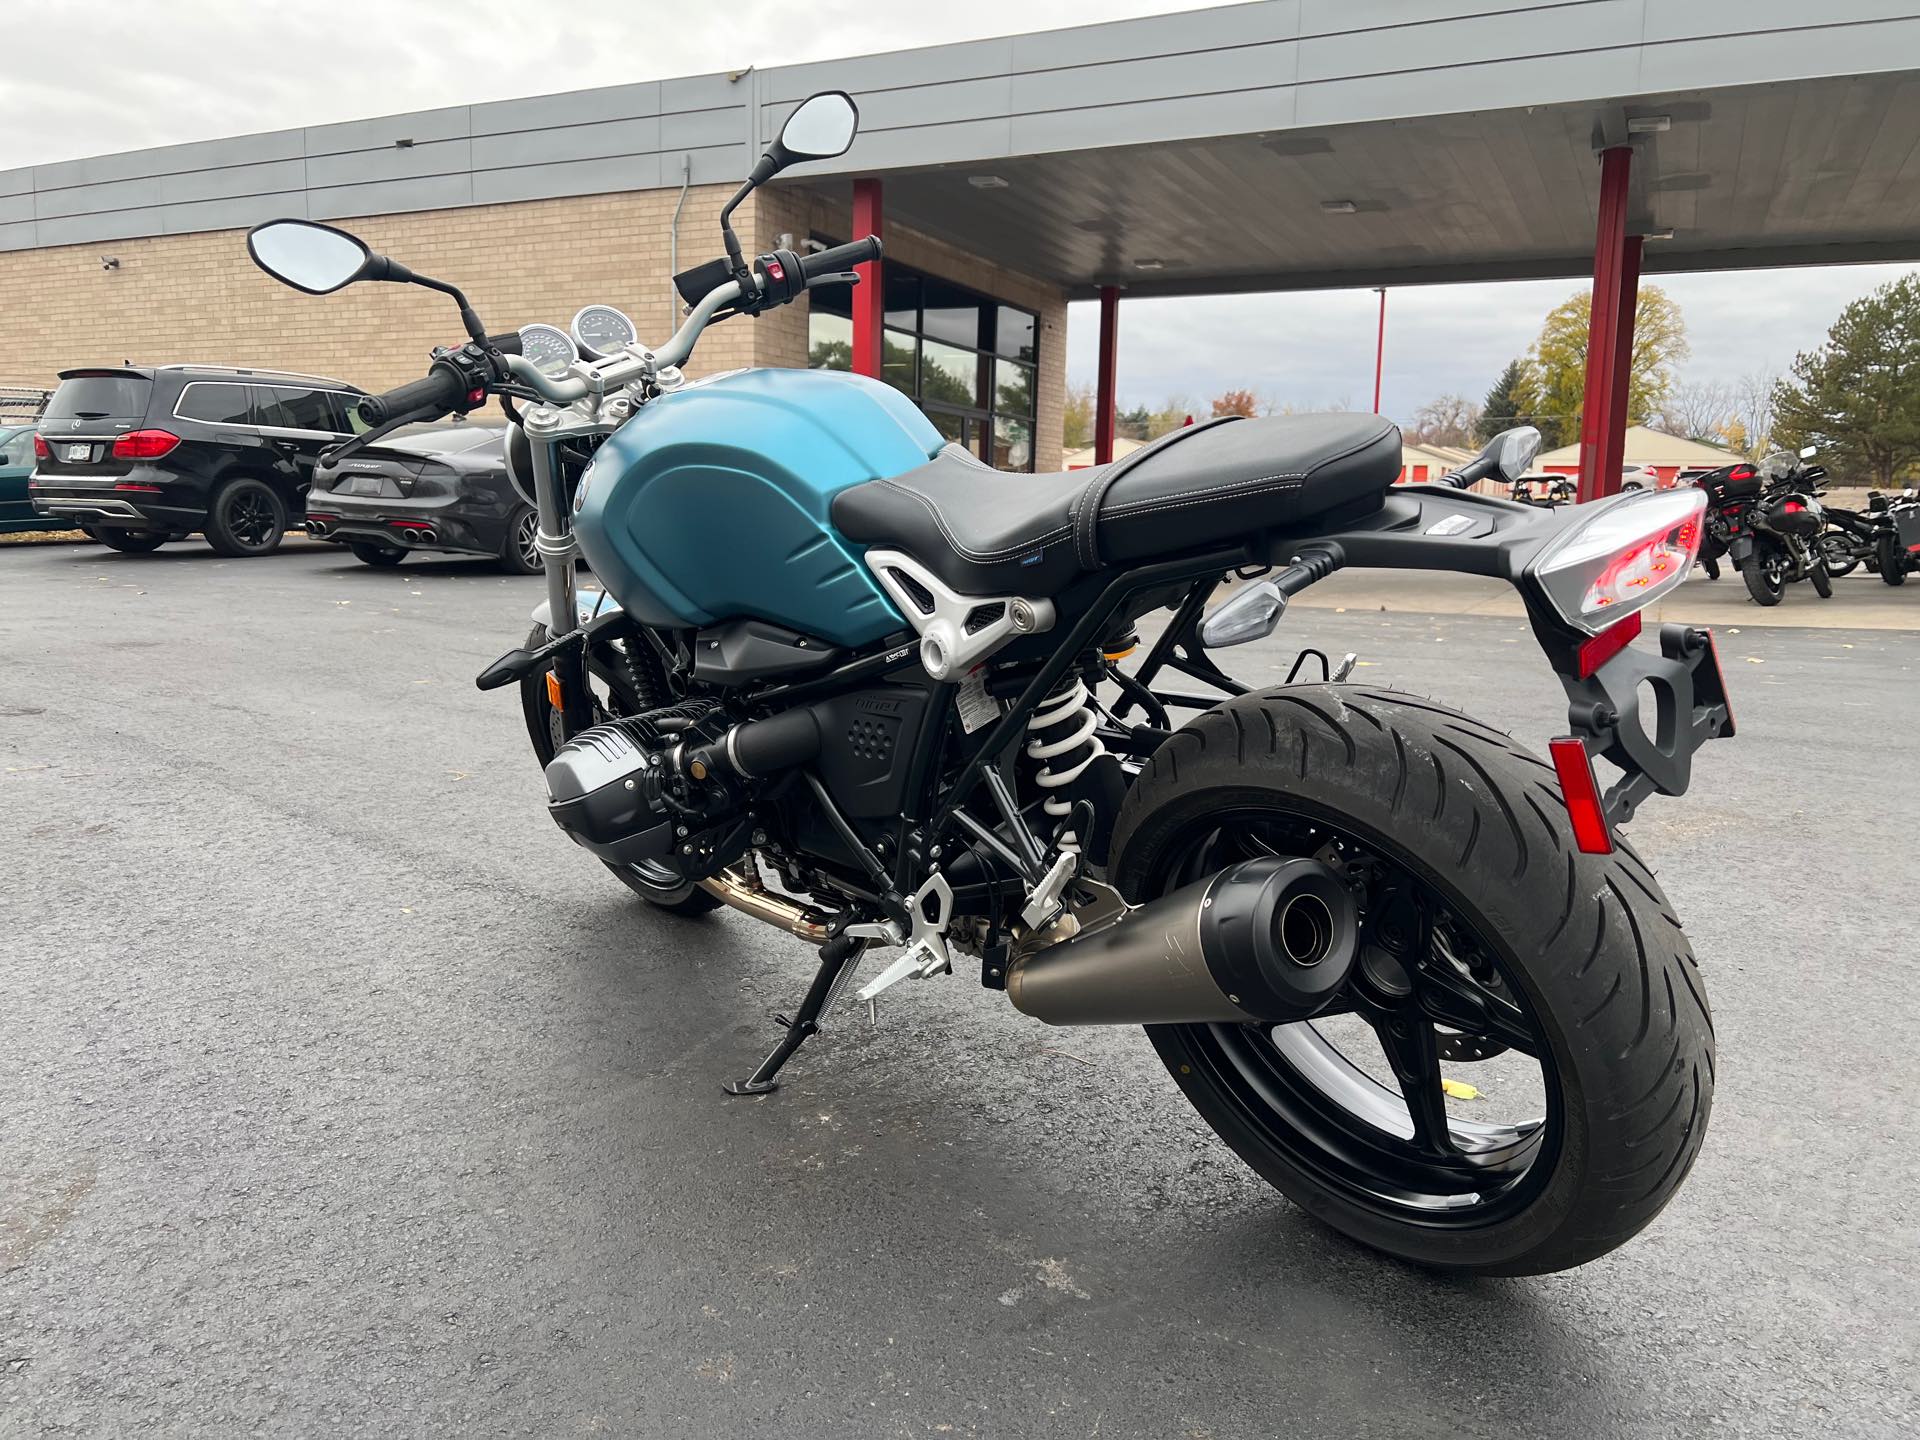 2022 BMW R nineT Pure at Aces Motorcycles - Fort Collins